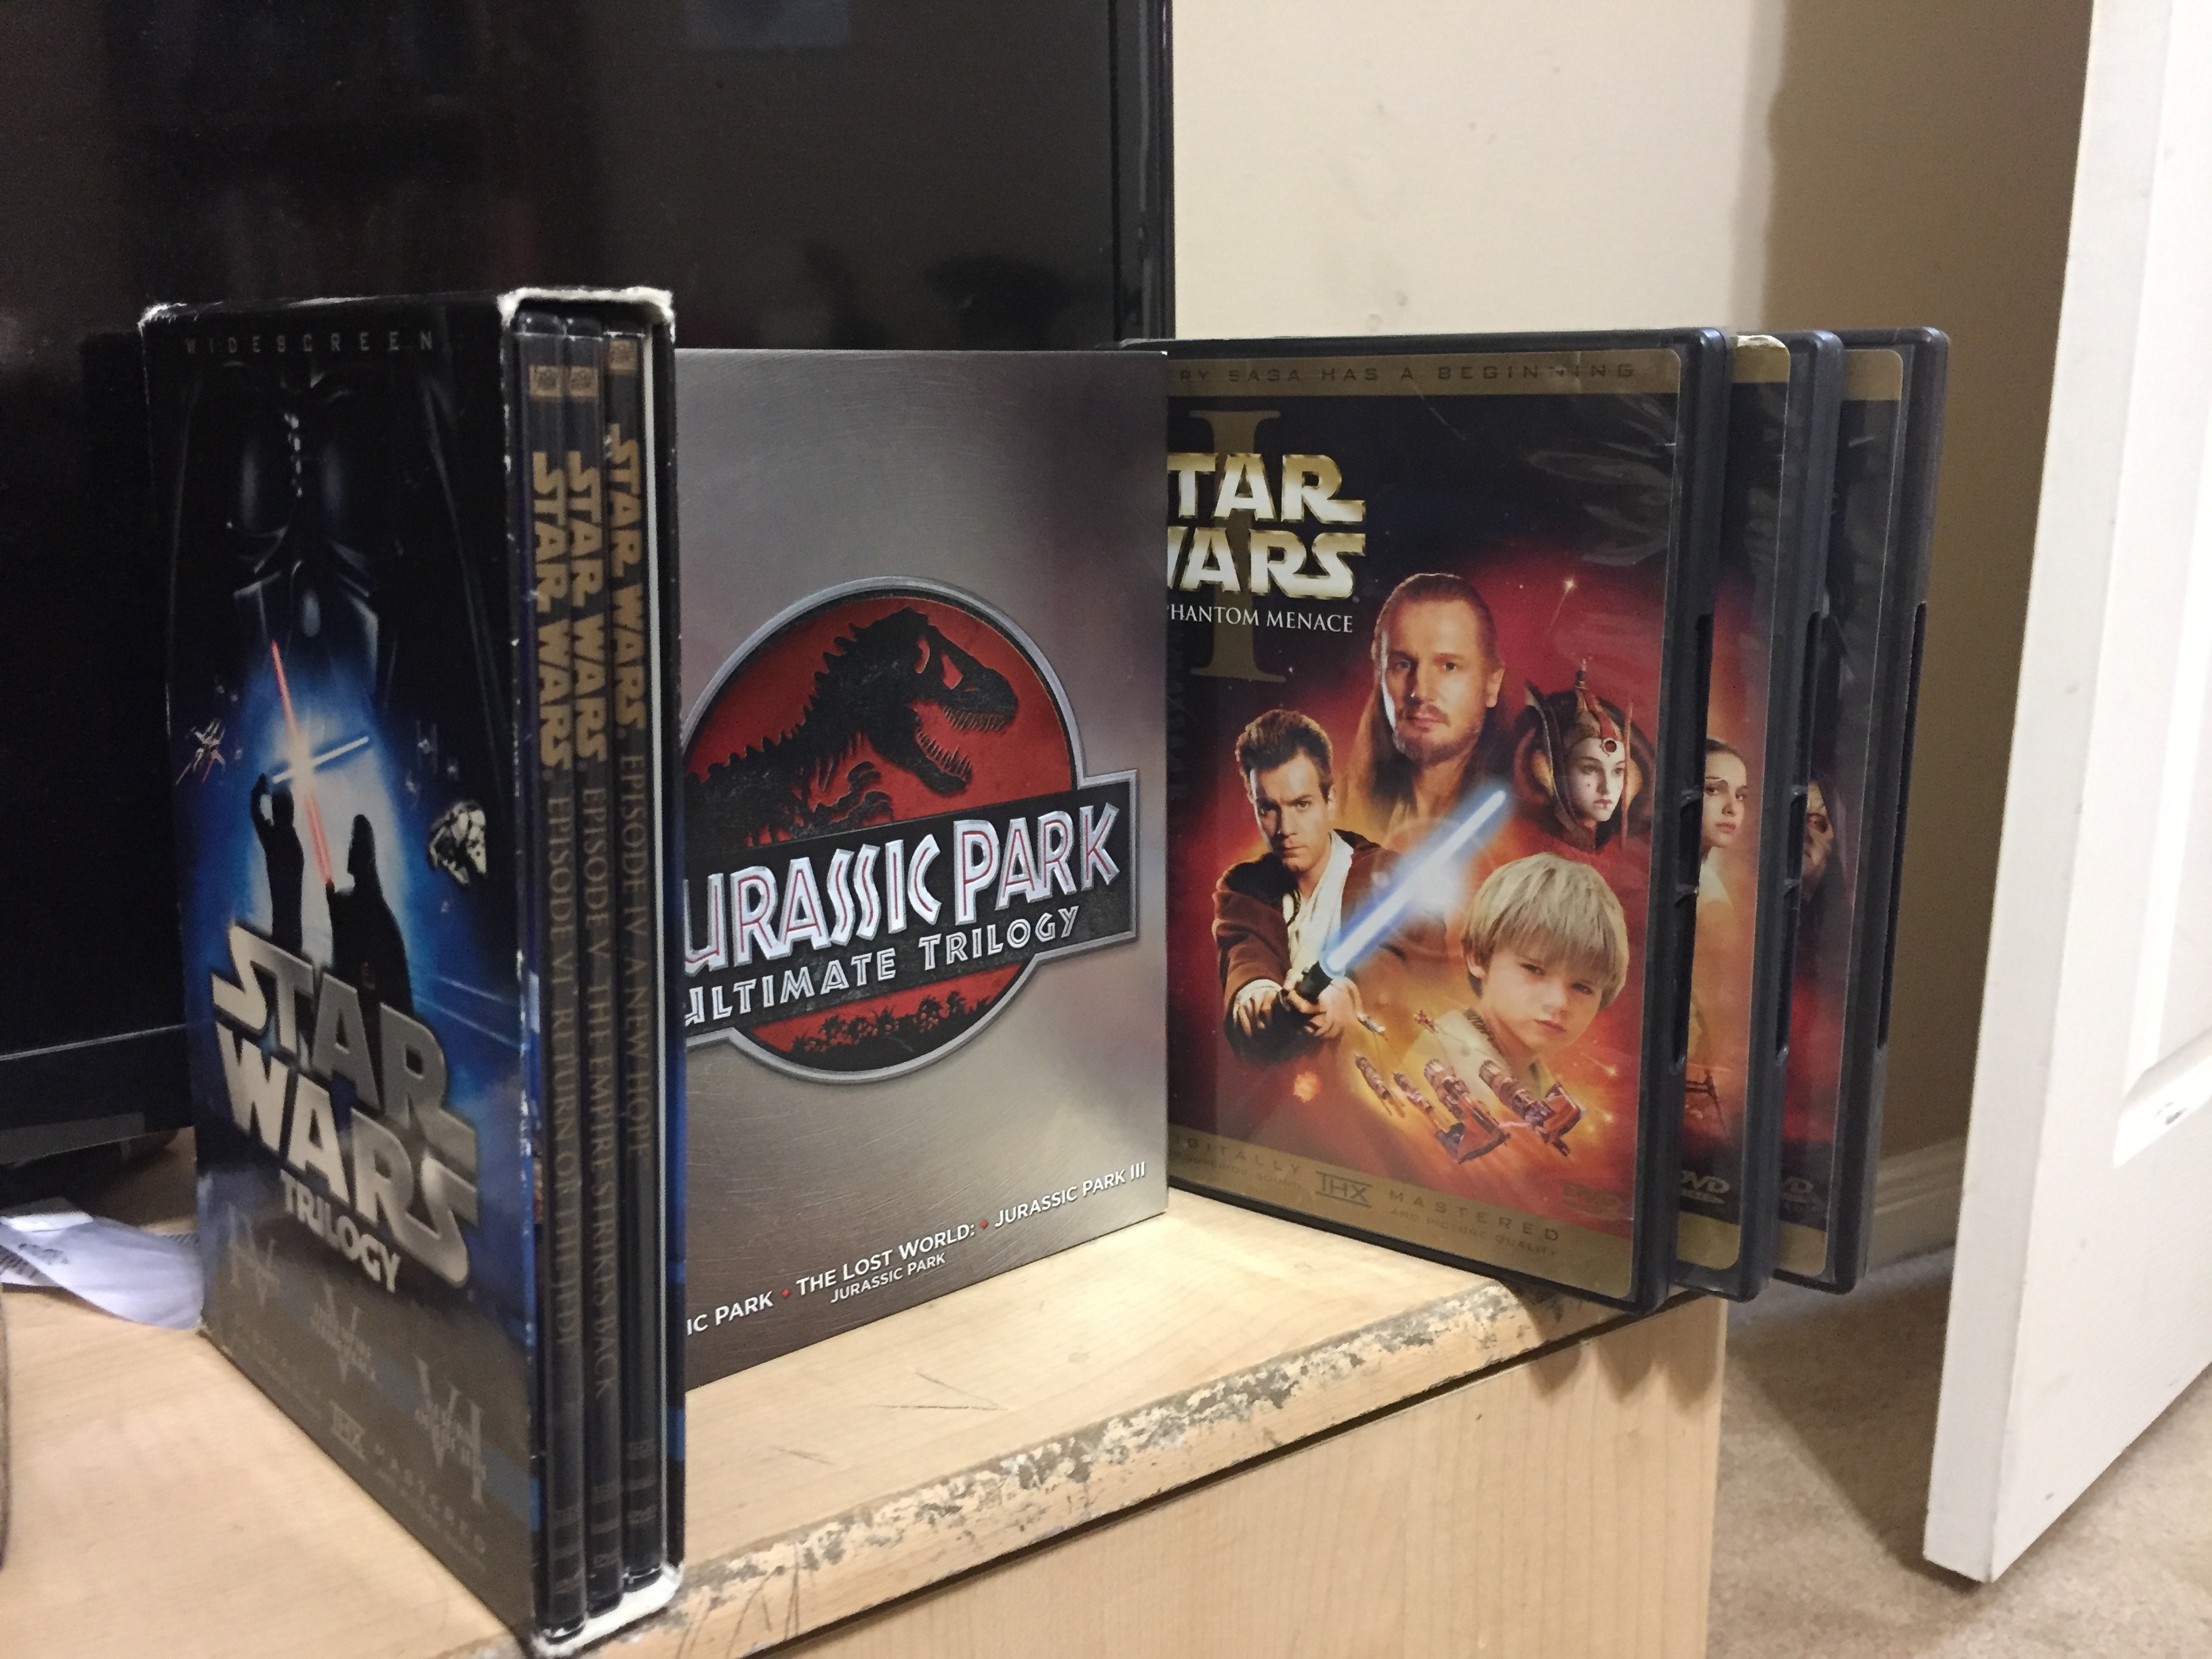 PHOTO: Image showing the box set for the original "Star Wars" trilogy, the "Jurassic Park Ultimate Trilogy" set and the three "Star Wars" prequel films on a television desk. Photo by The Signal managing editor Troylon Griffin II.